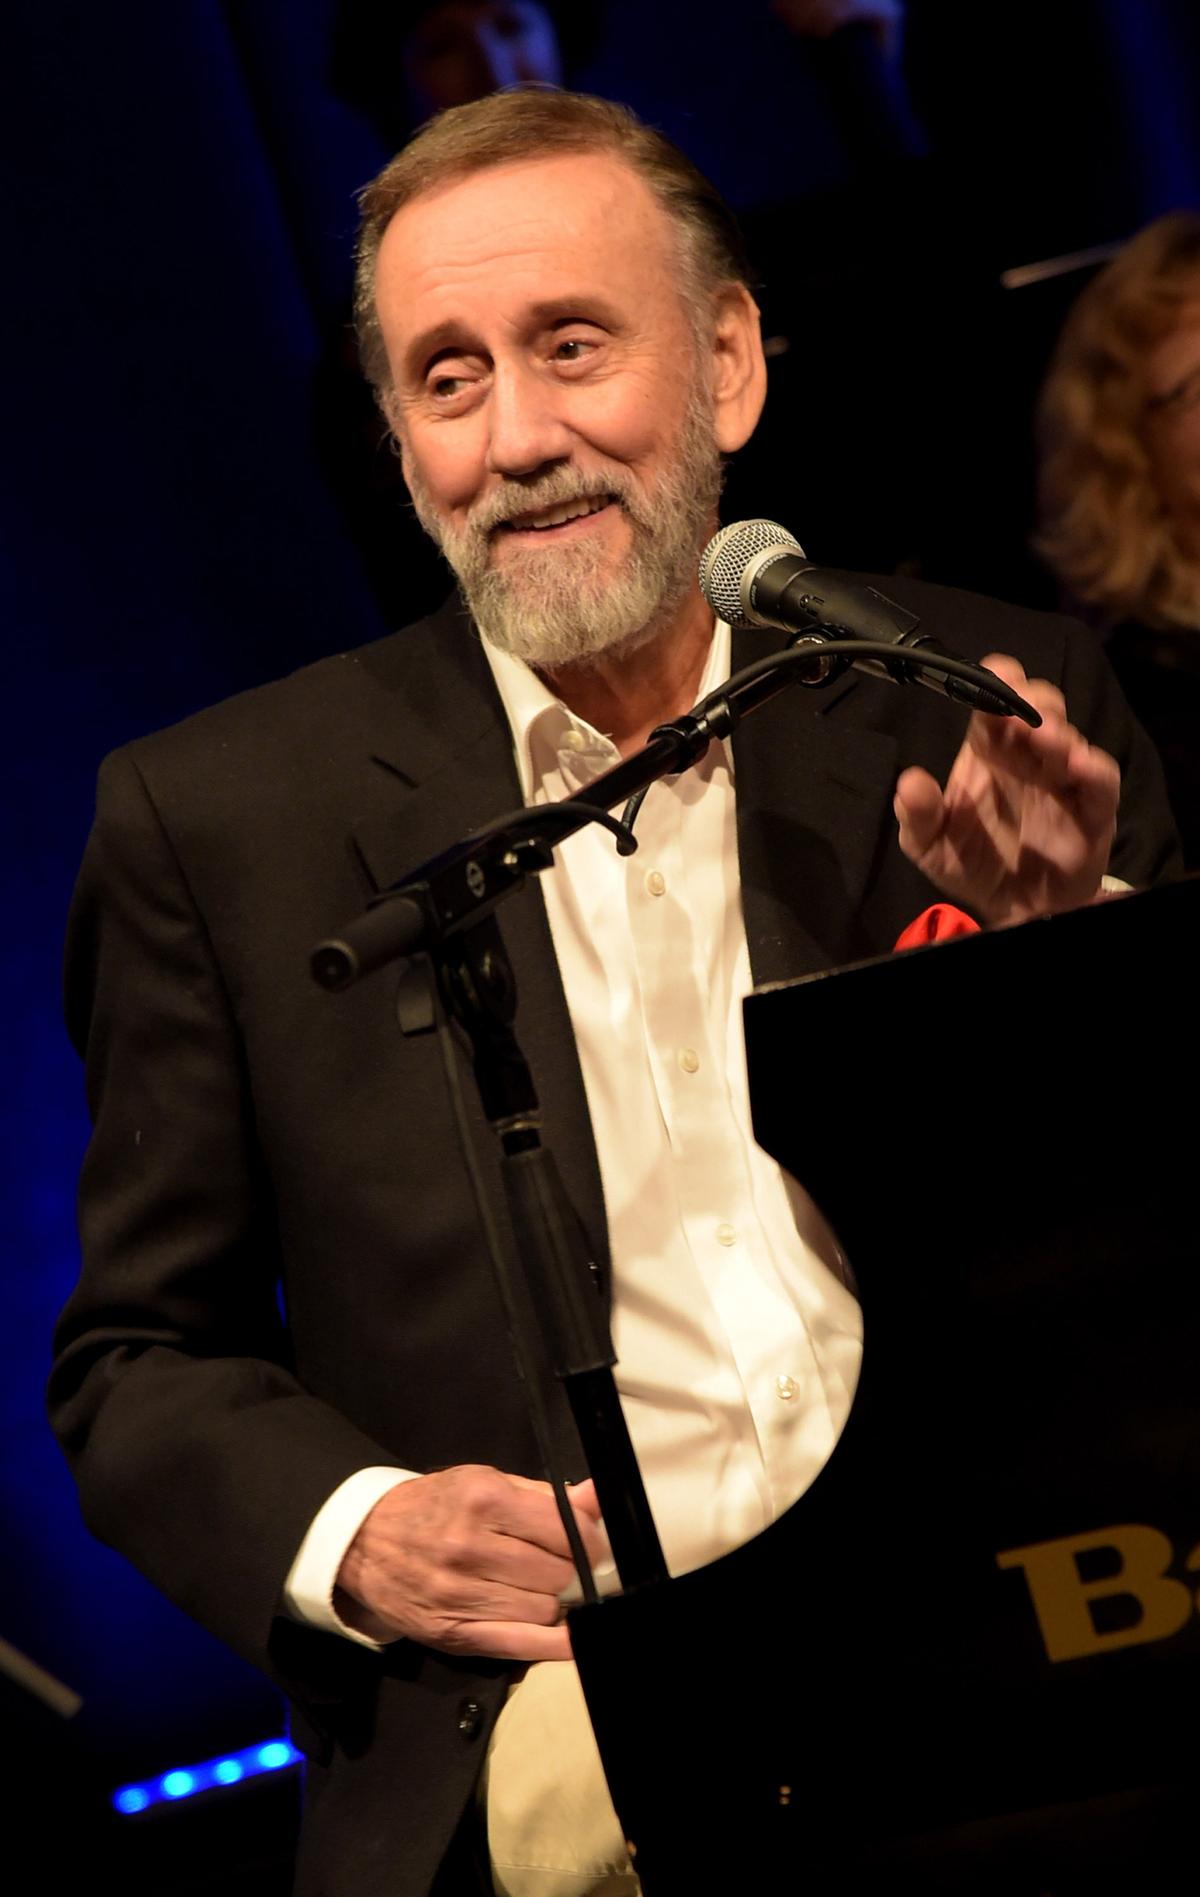 Singer and songwriter Ray Stevens at the Country Music Hall Of Fame & Museum on July 19, 2014 in Nashville, Tenn. Stevens wrote "Christmas Bells." (Rick Diamond/Getty Images for Country Music Hall Of Fame & Museum)